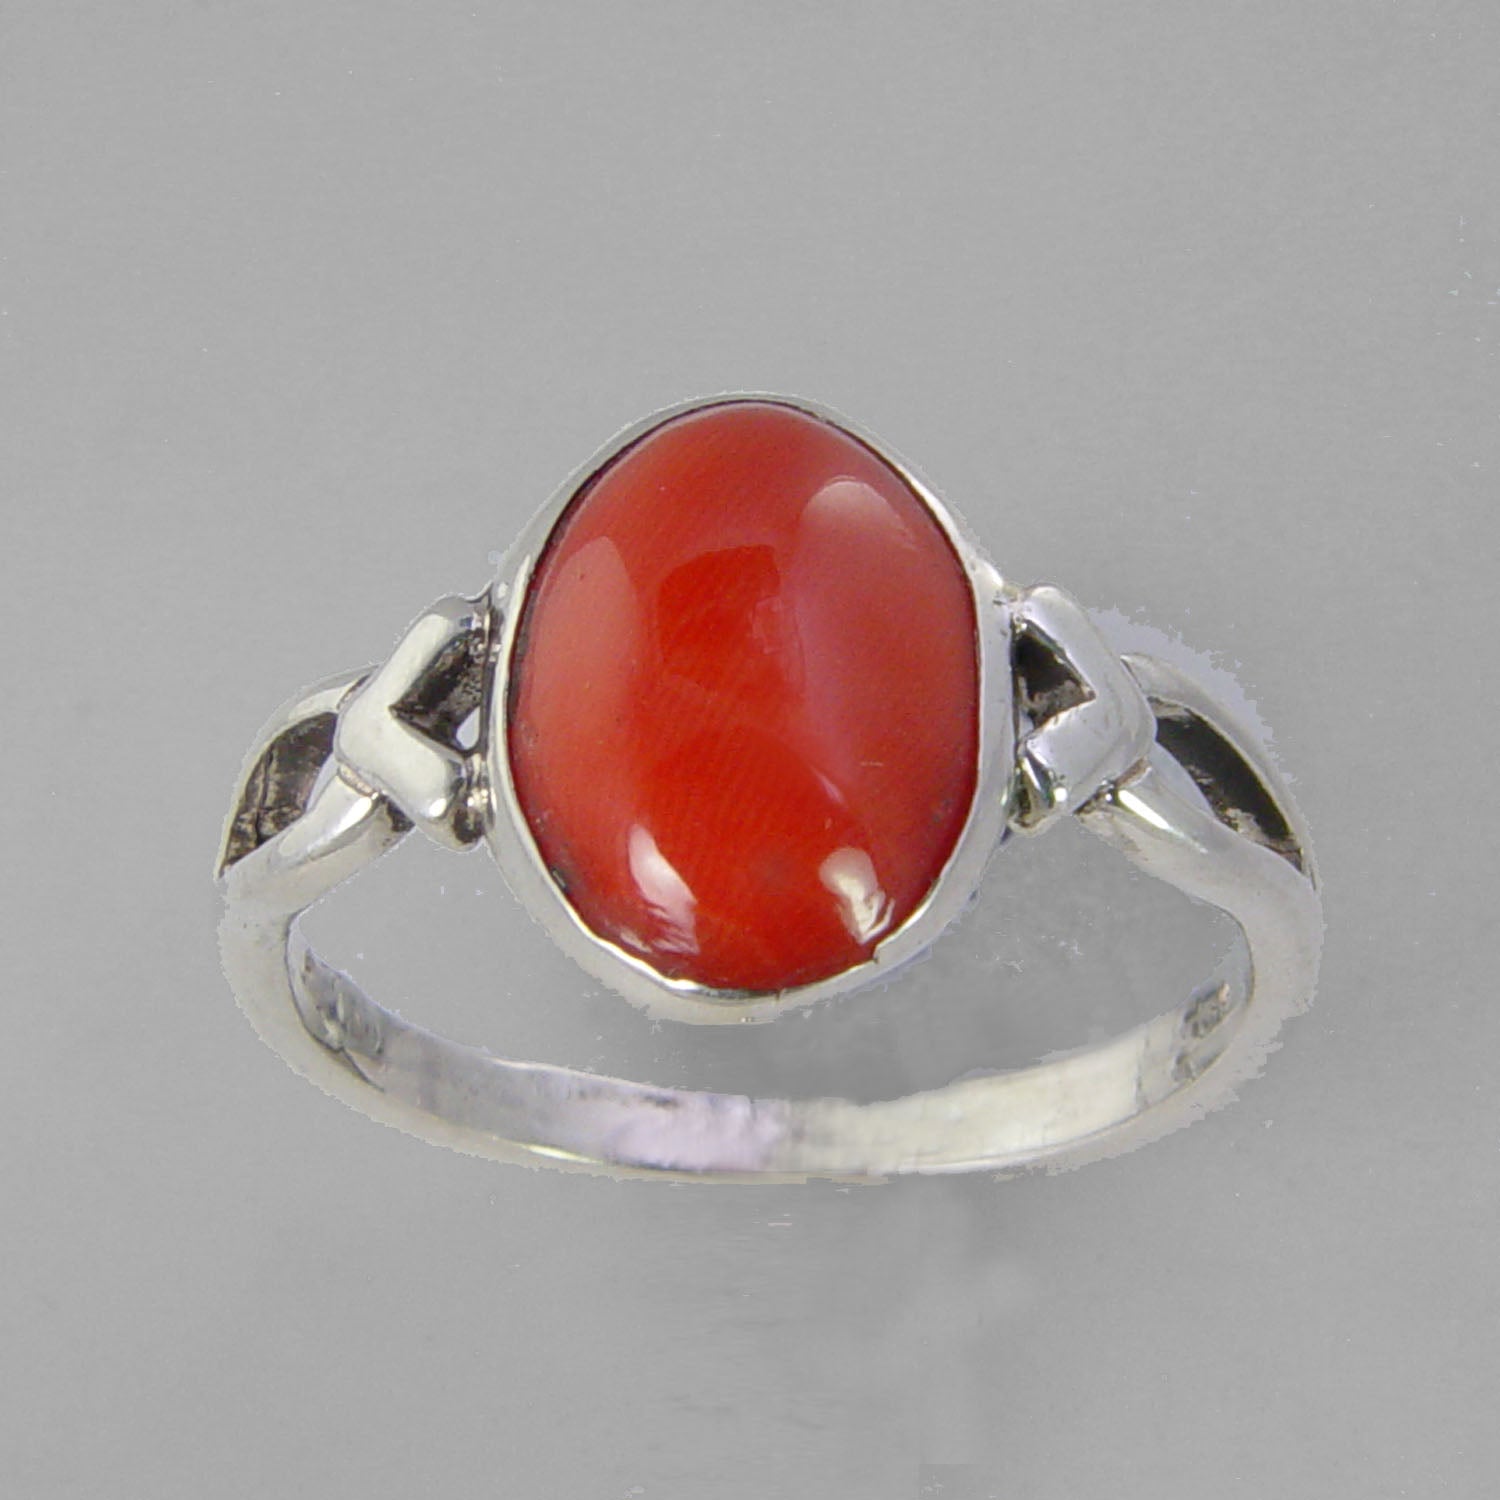 Red Coral Ring 925 Sterling Silver Ring Oxidized Ring Handmade Gemstone Ring  Red Coral Gemstone Women Ring Designer Ring Gift for Her - Etsy